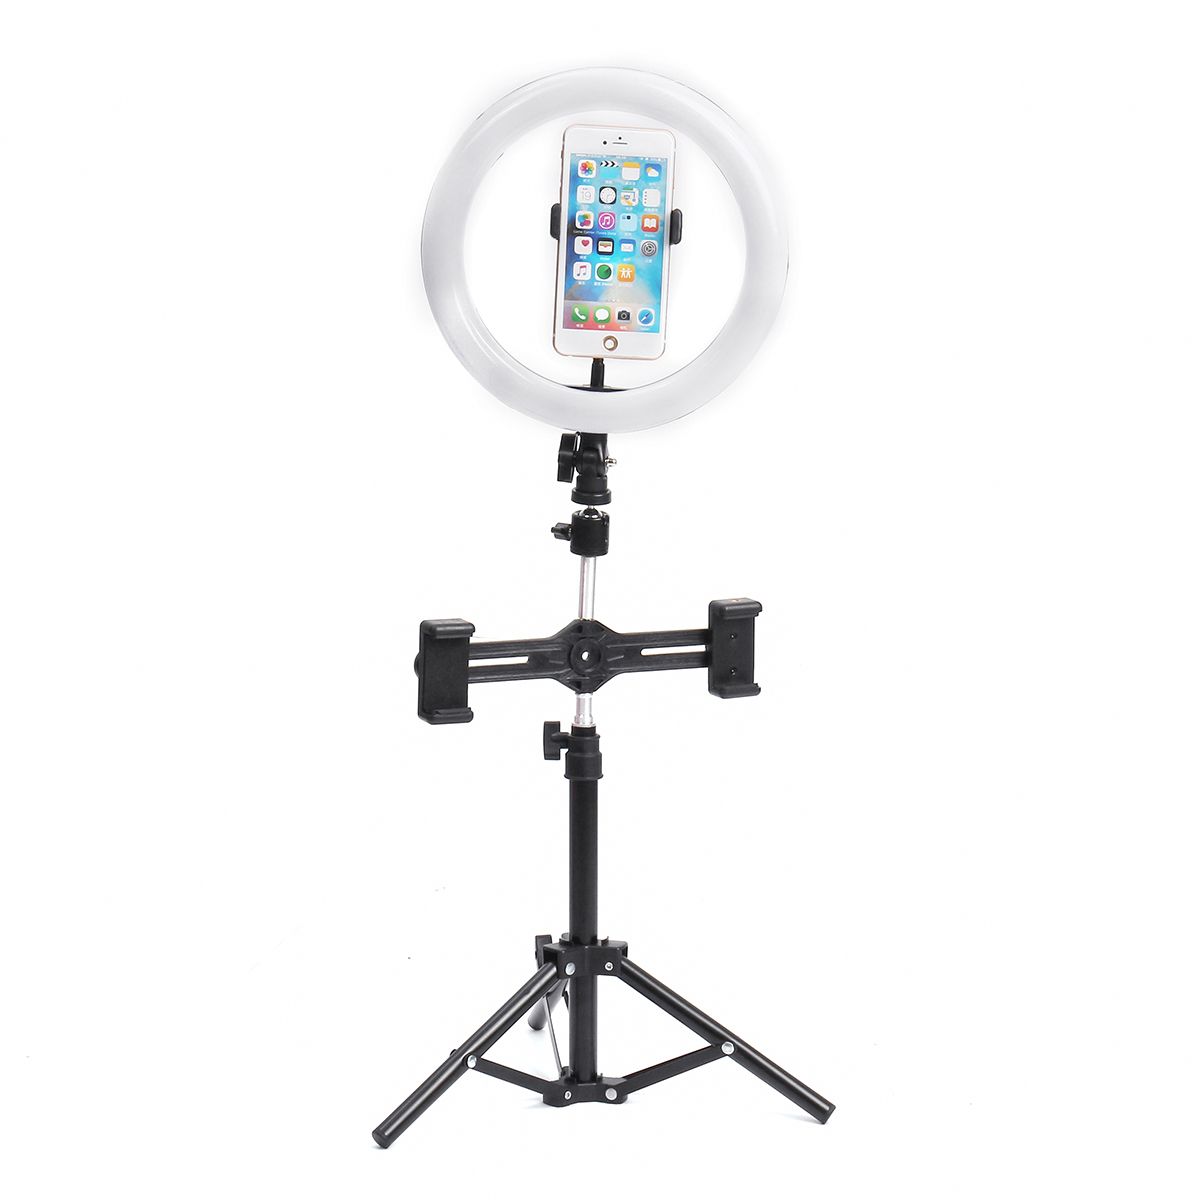 8-Inch-Video-Photography-Live-Streaming-Ring-Light-with-50cm-Light-Stand-3-Phone-Clip-1581006